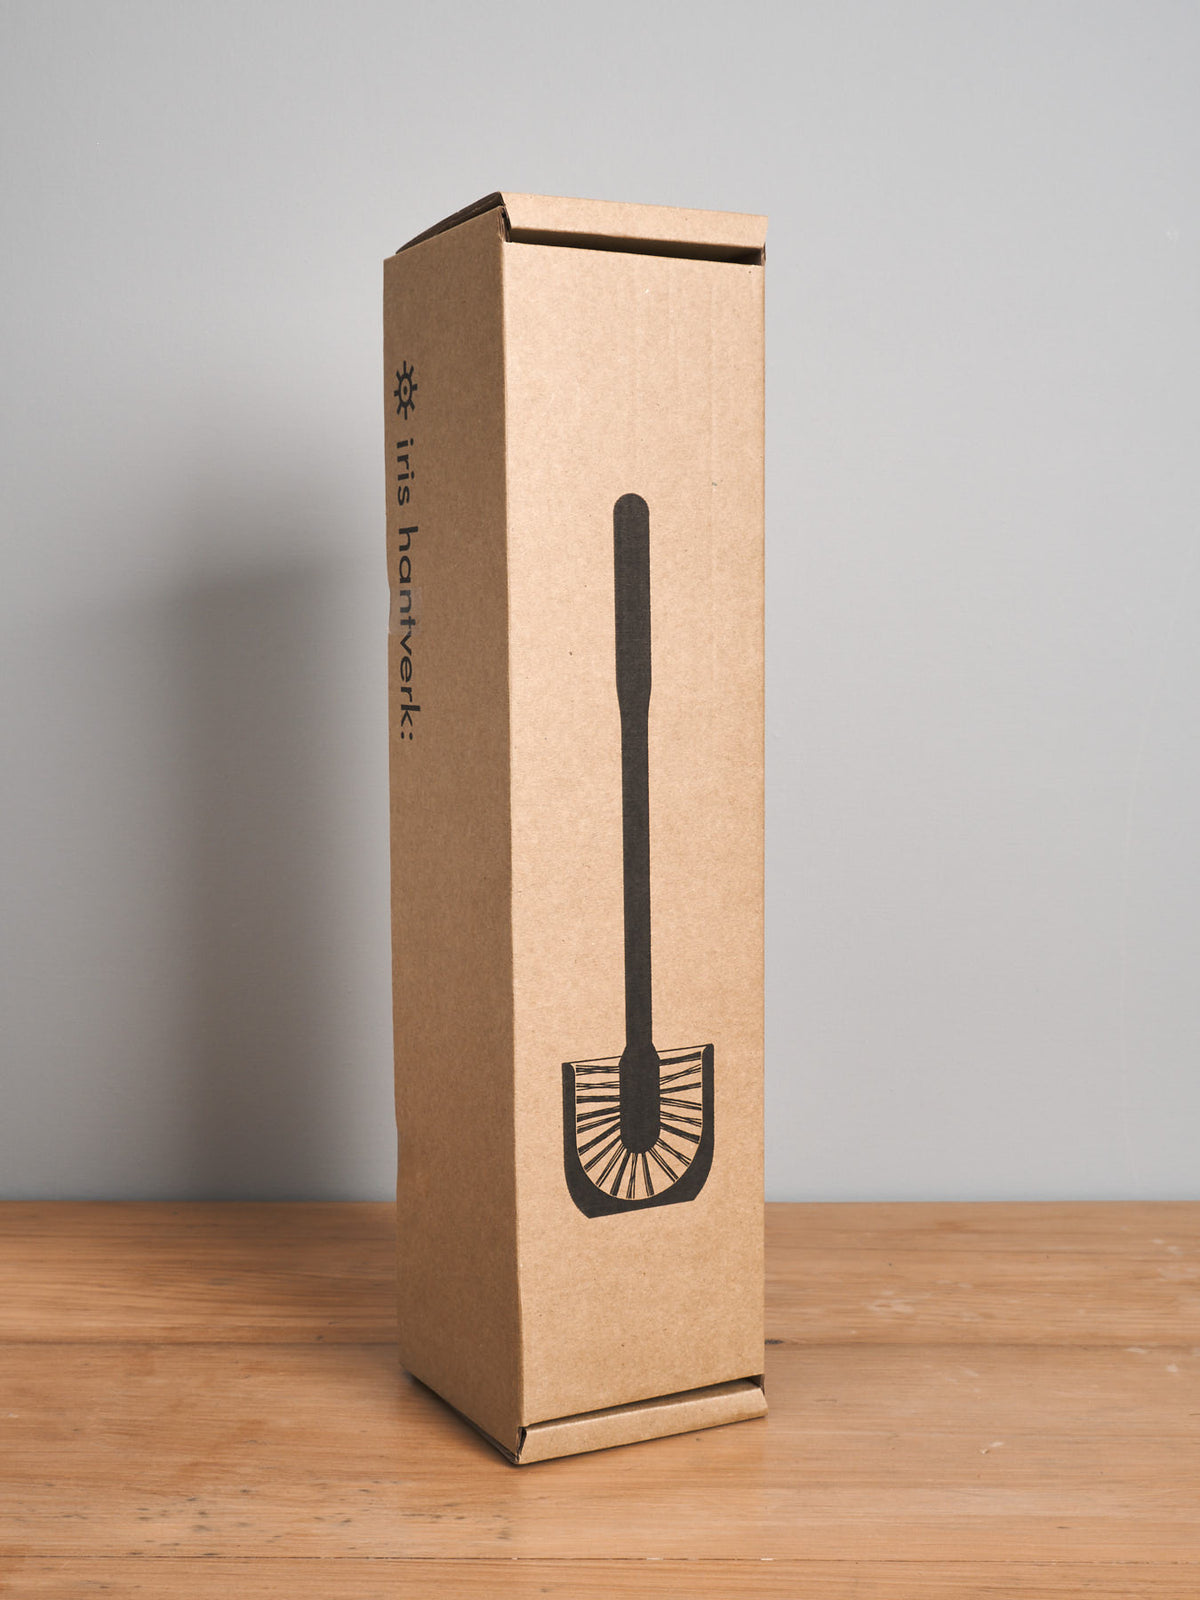 An Iris Hantverk cardboard box with a Toilet Brush with Concrete Cup in it.